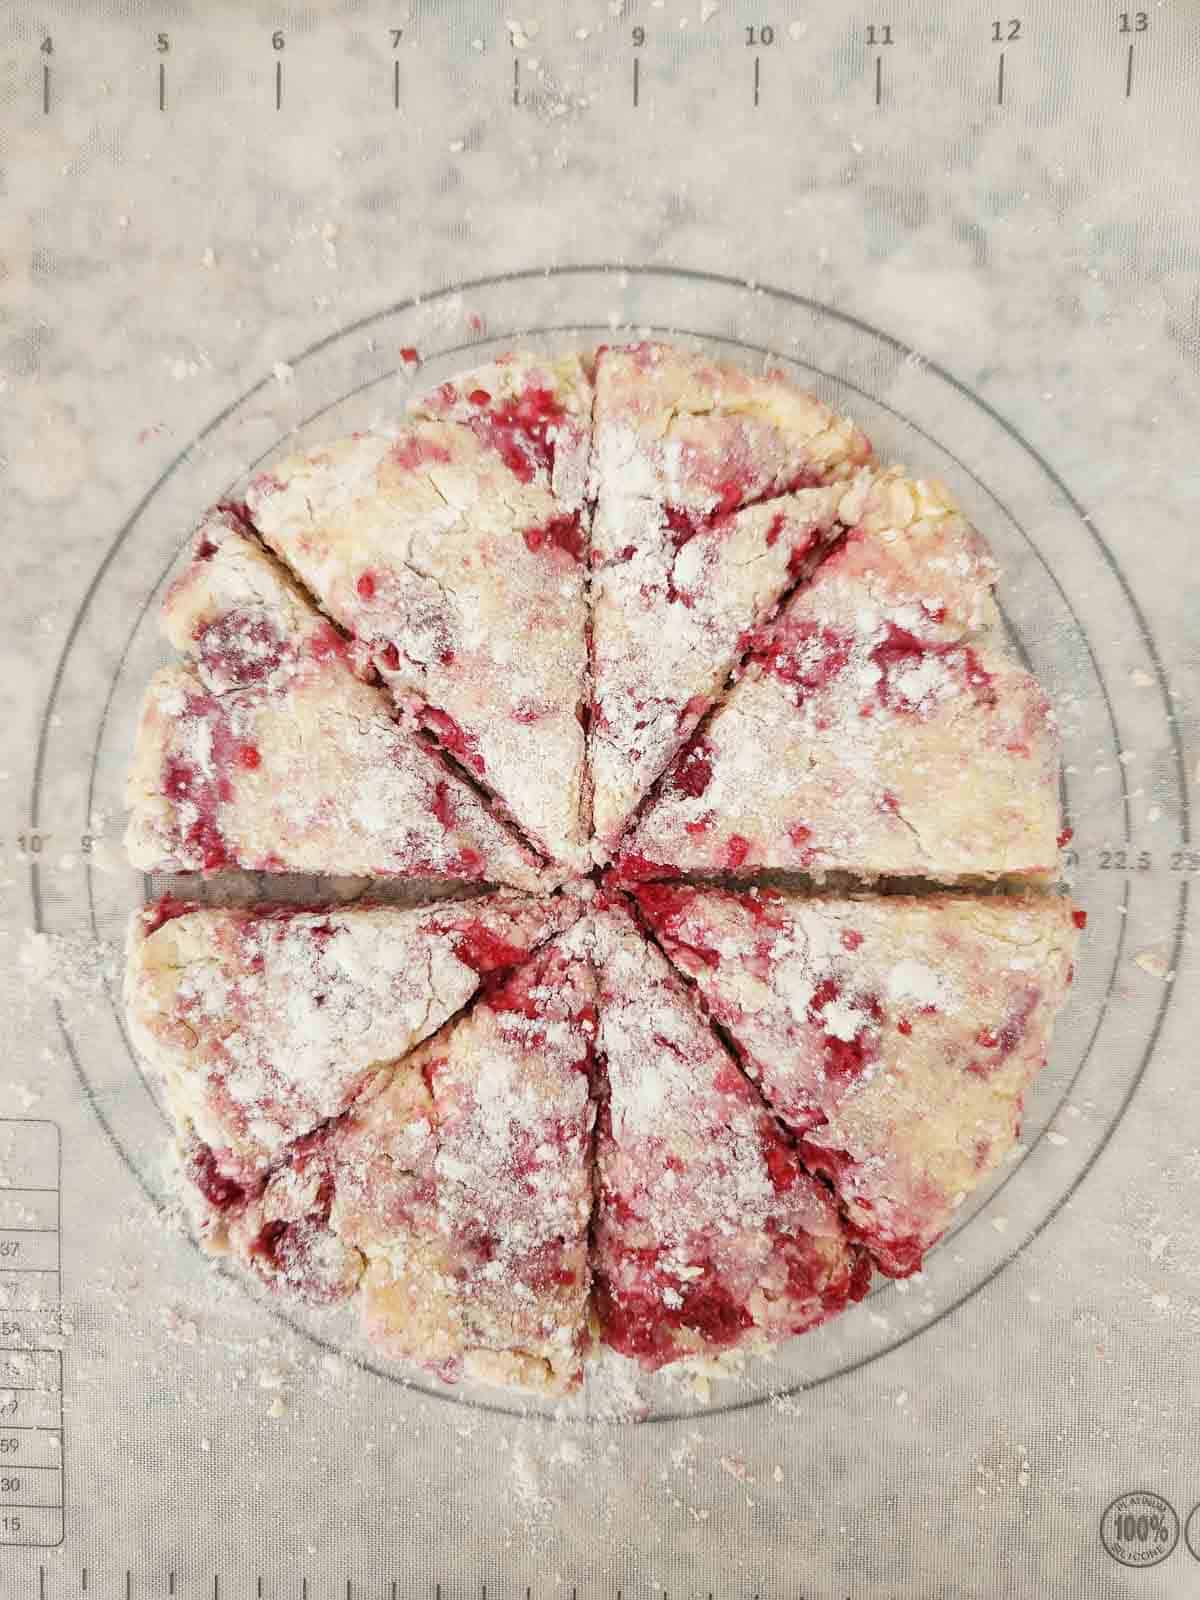 Raspberry scone dough in a circle and cut into 8 even triangles.